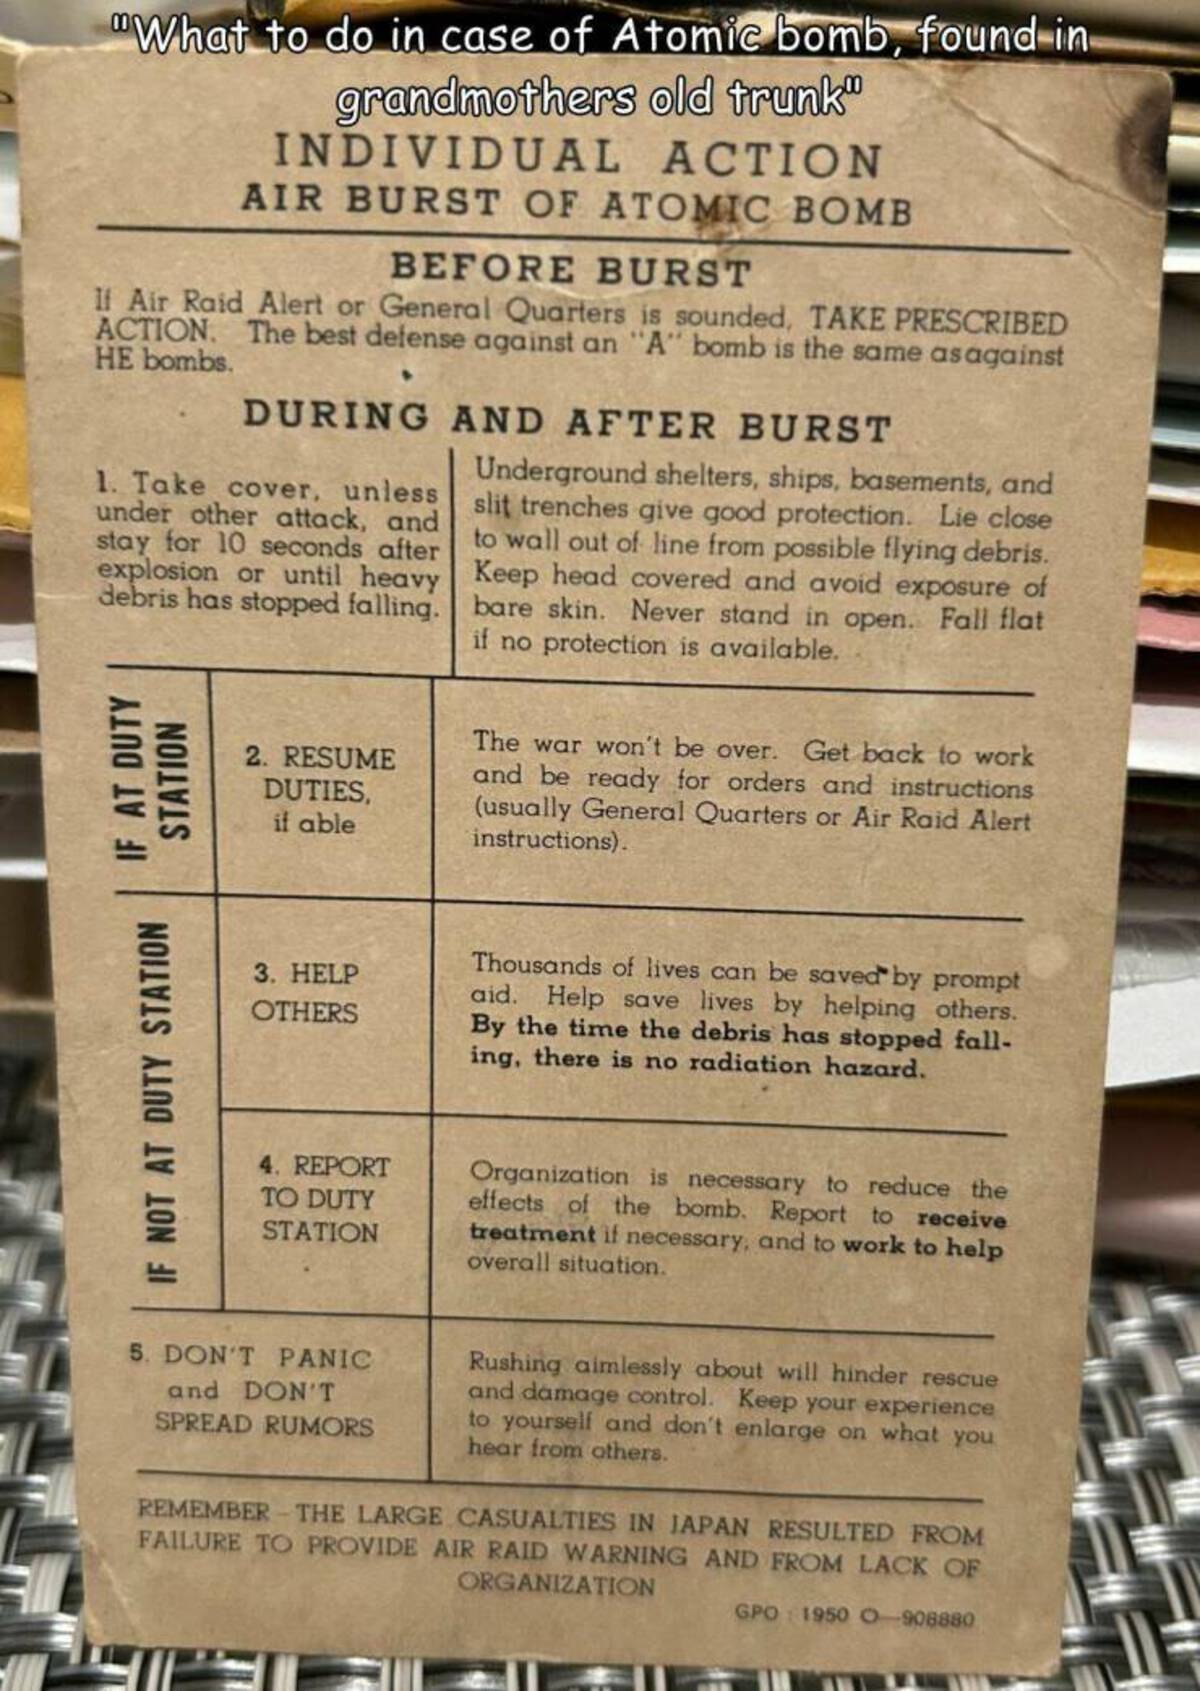 "What to do in case of Atomic bomb, found in grandmothers old trunk" Action Before Burst If Air Raid Alert or General Quarters is sounded, Take Prescribed Action. The best defense against an "A" bomb is the same as against He bombs. If At Duty Station…